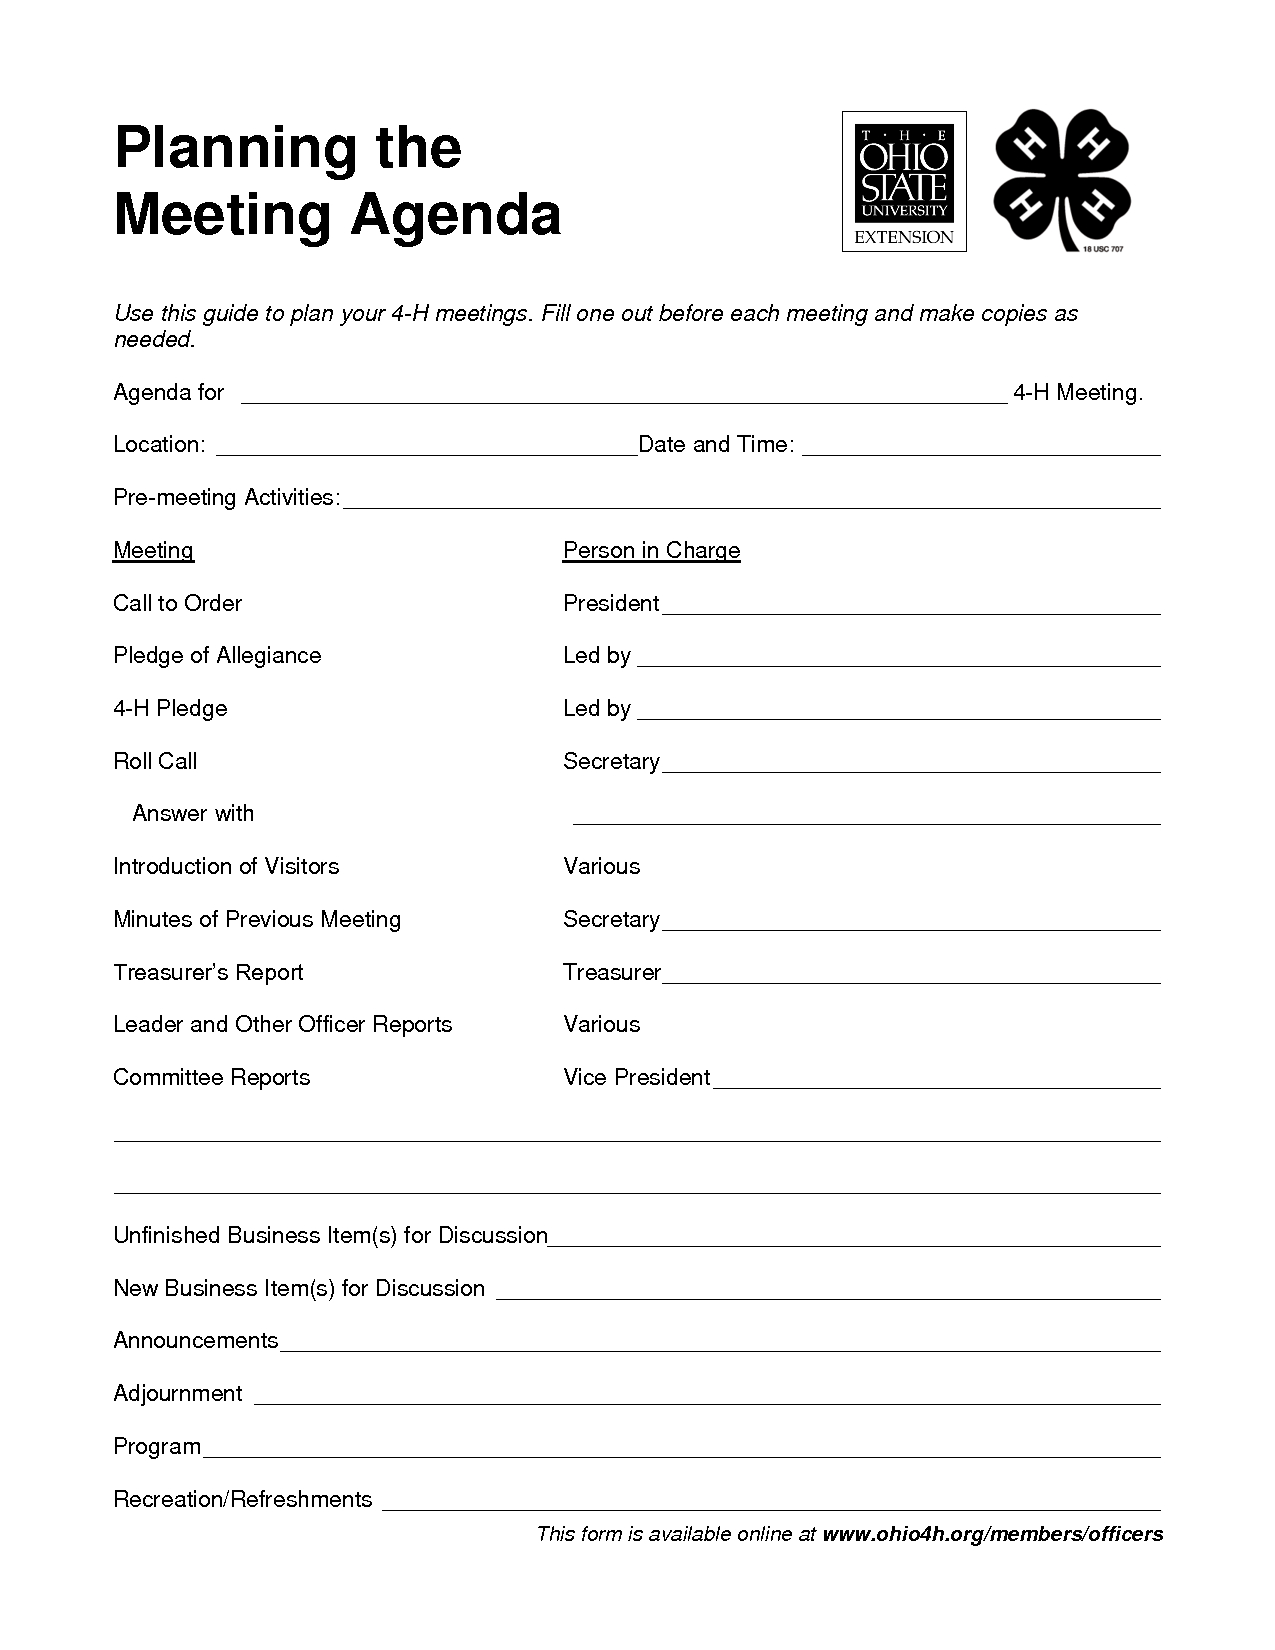 4 H Meeting Agenda Template Google Search Meeting Agenda with dimensions 1275 X 1650